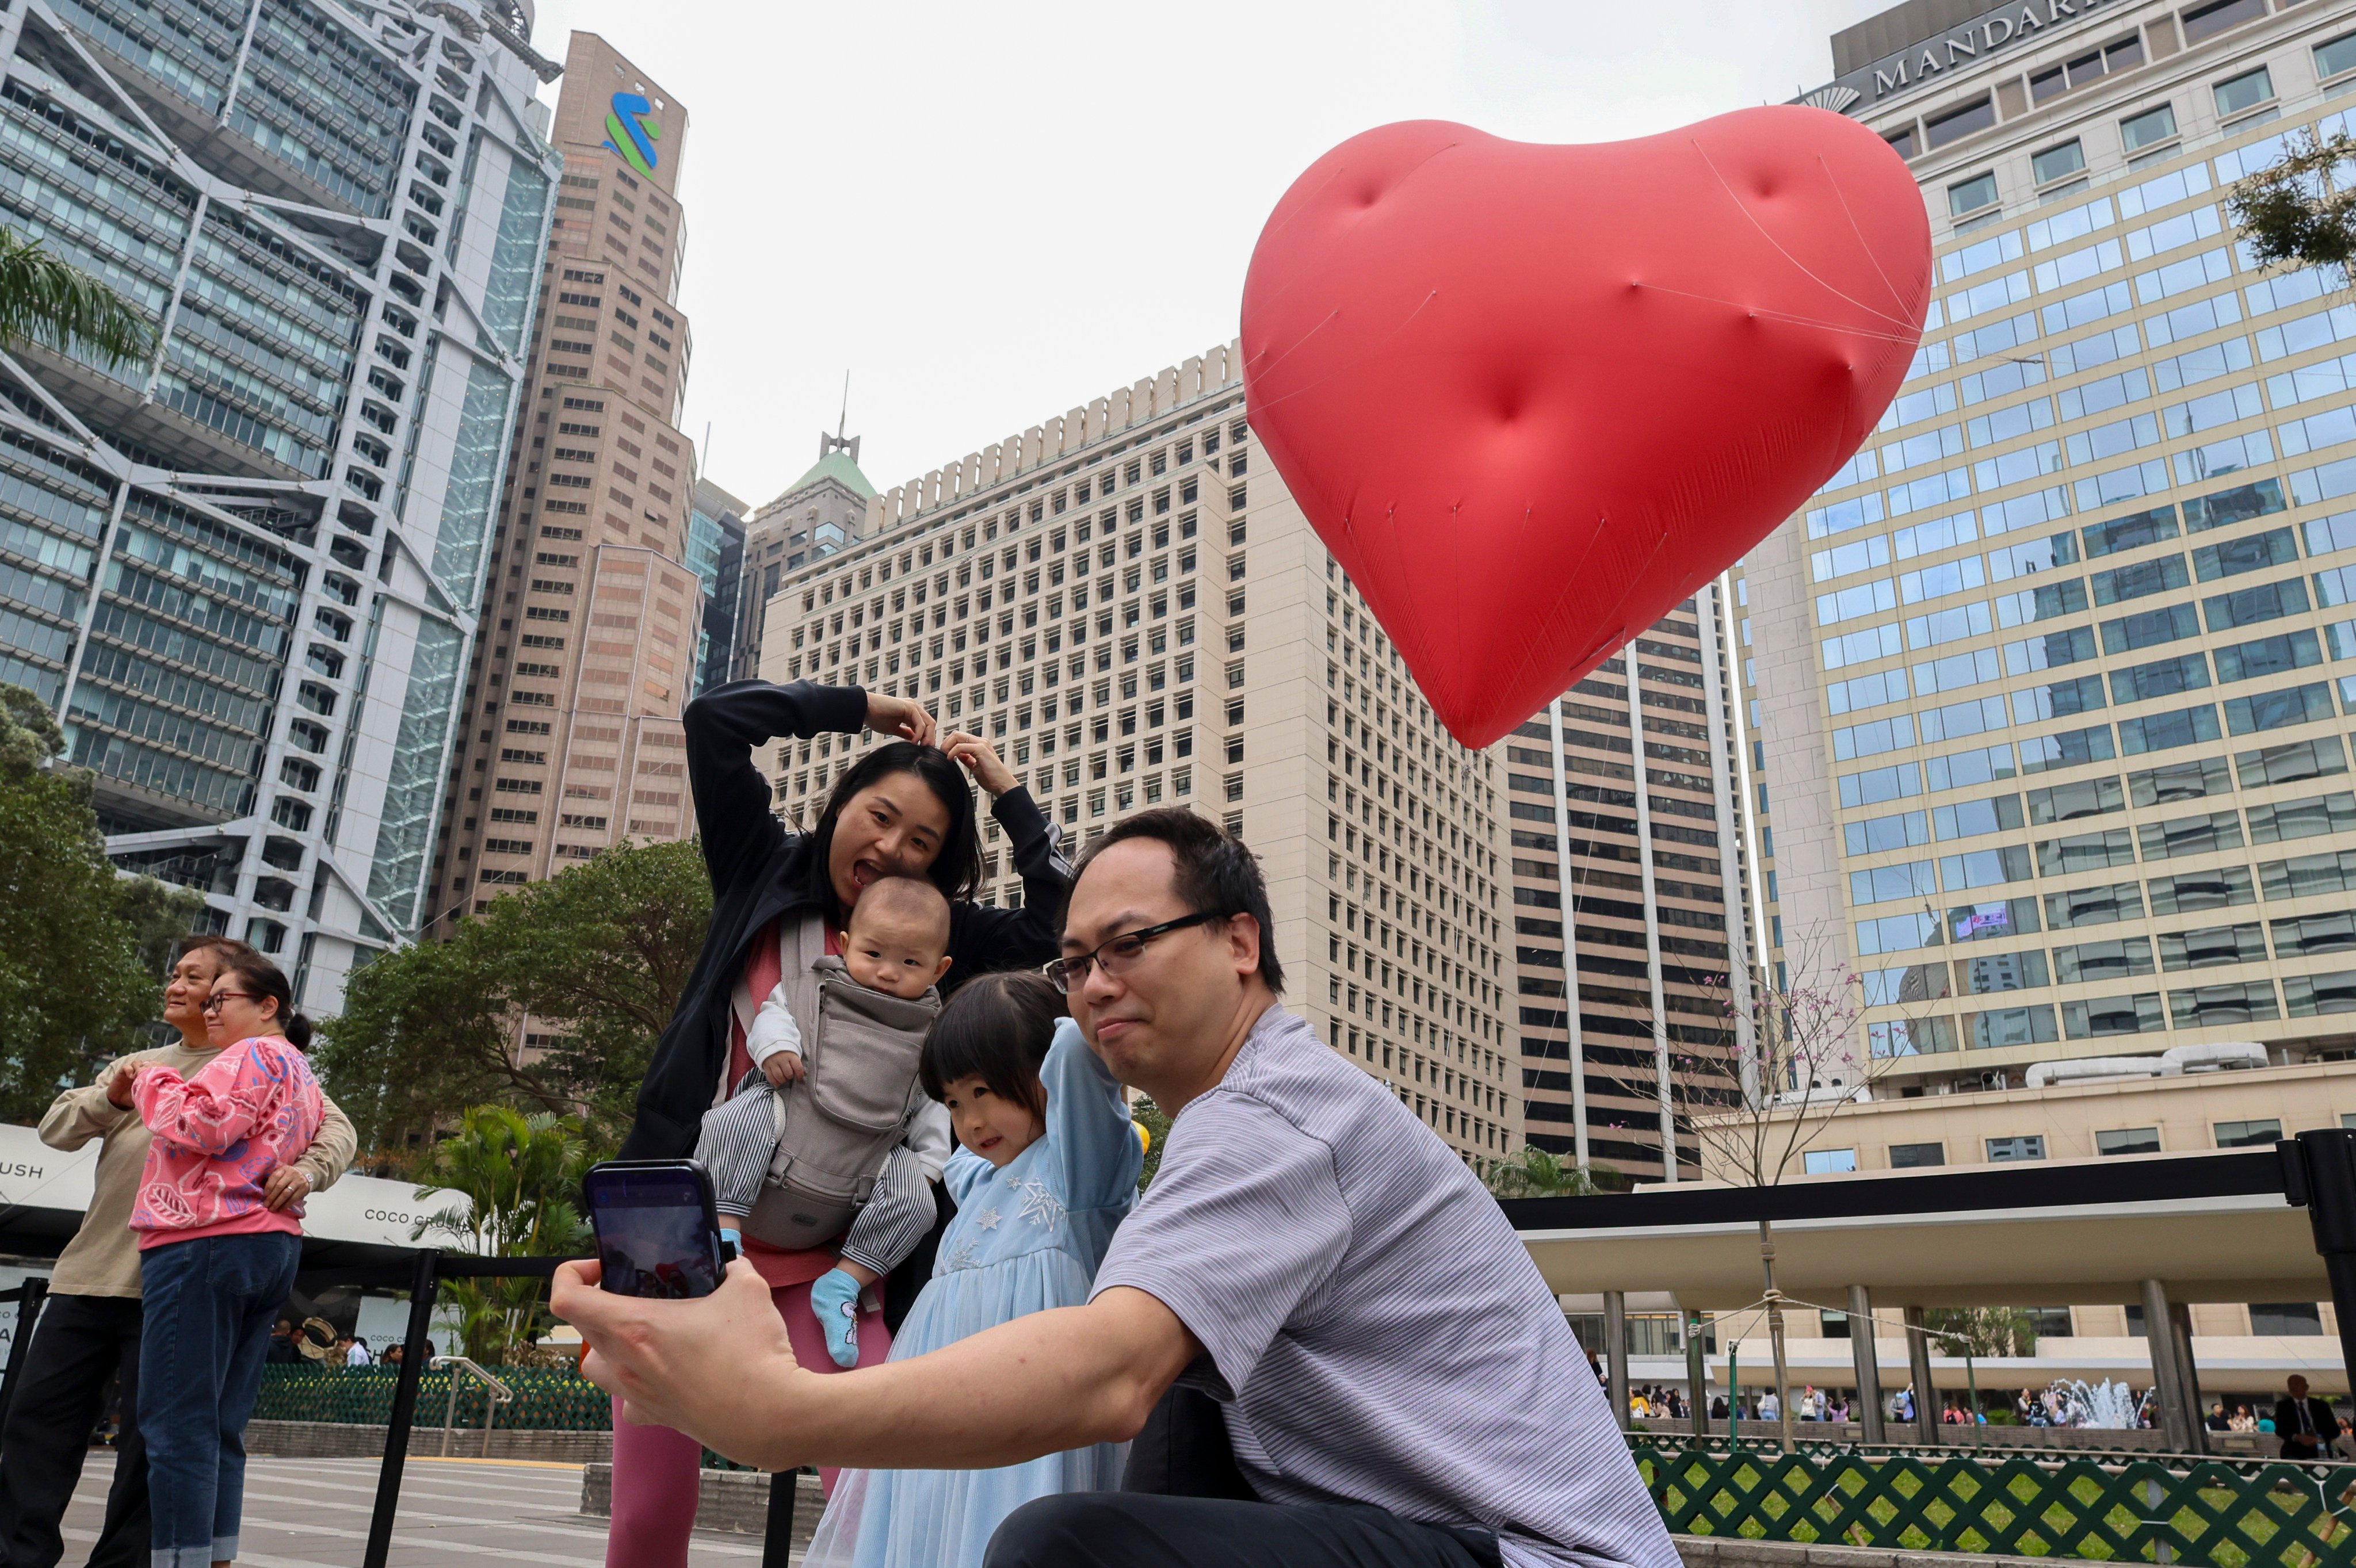 The Chubby Hearts art project was started in the UK by designer Anya Hindmarch. The Hong Kong edition drew criticism, but it has brought joy and laughter to the city, and we need more projects like it, Luisa Tam says. Photo: Dickson Lee